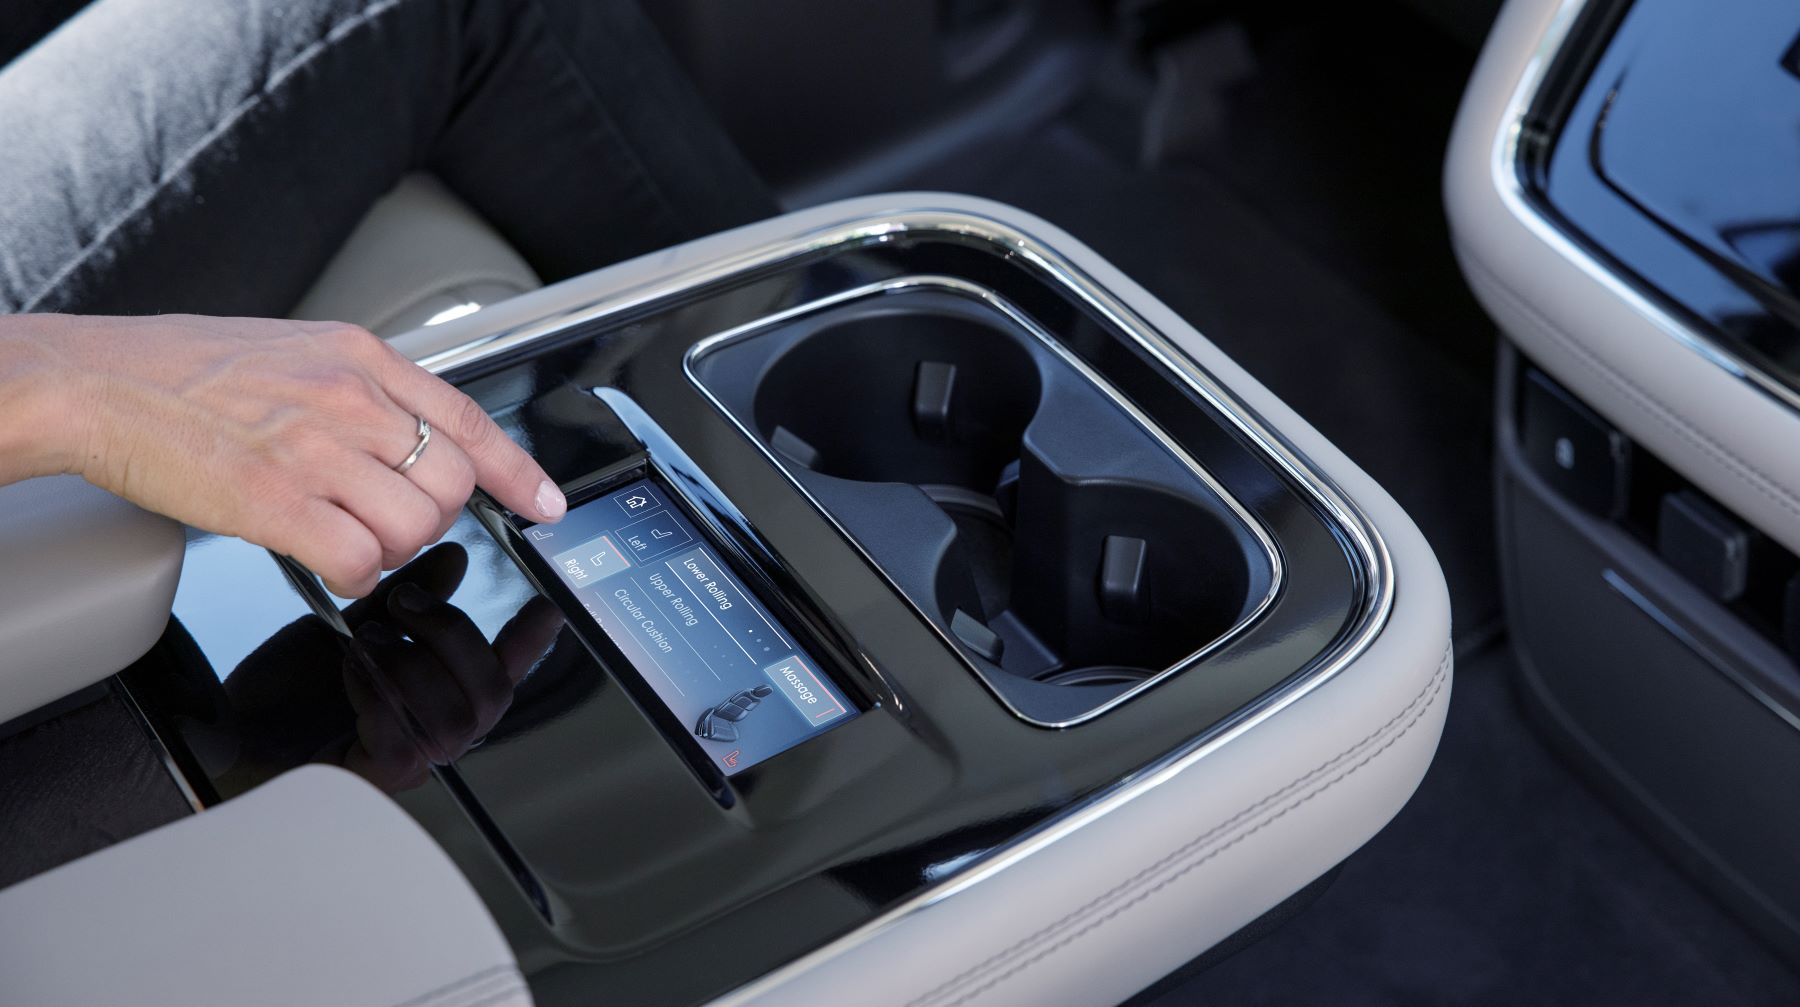 A pair of cupholders found inside the 2022 Lincoln Navigator Flight Blue Reserve full-size luxury SUV model